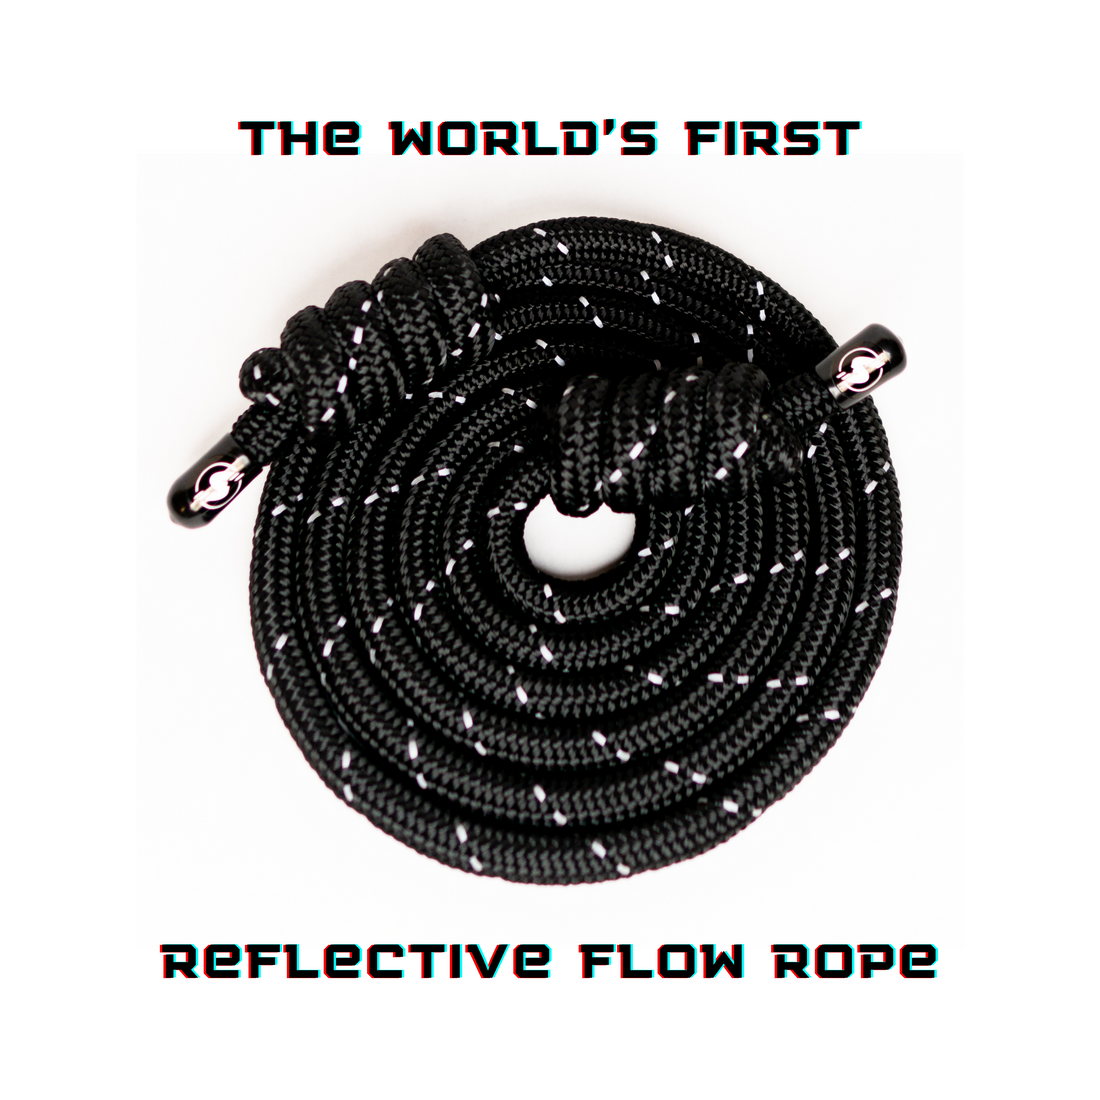 INTRODUCING THE BLACK MAMBA | THE WORLD'S FIRST REFLECTIVE FLOW ROPE